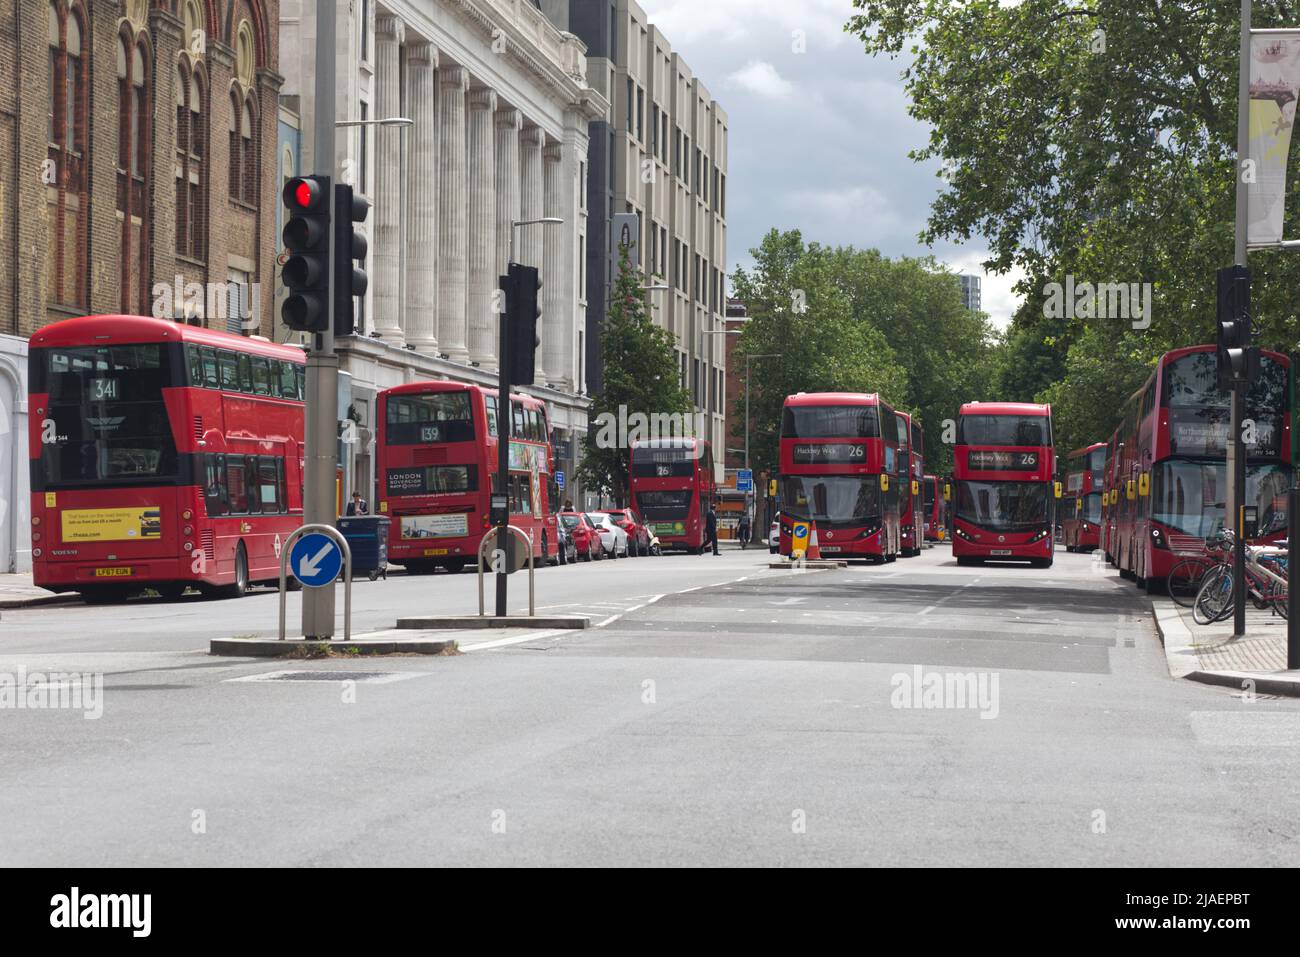 double decker buses, well known iconic symbol of the British capital, London Stock Photo